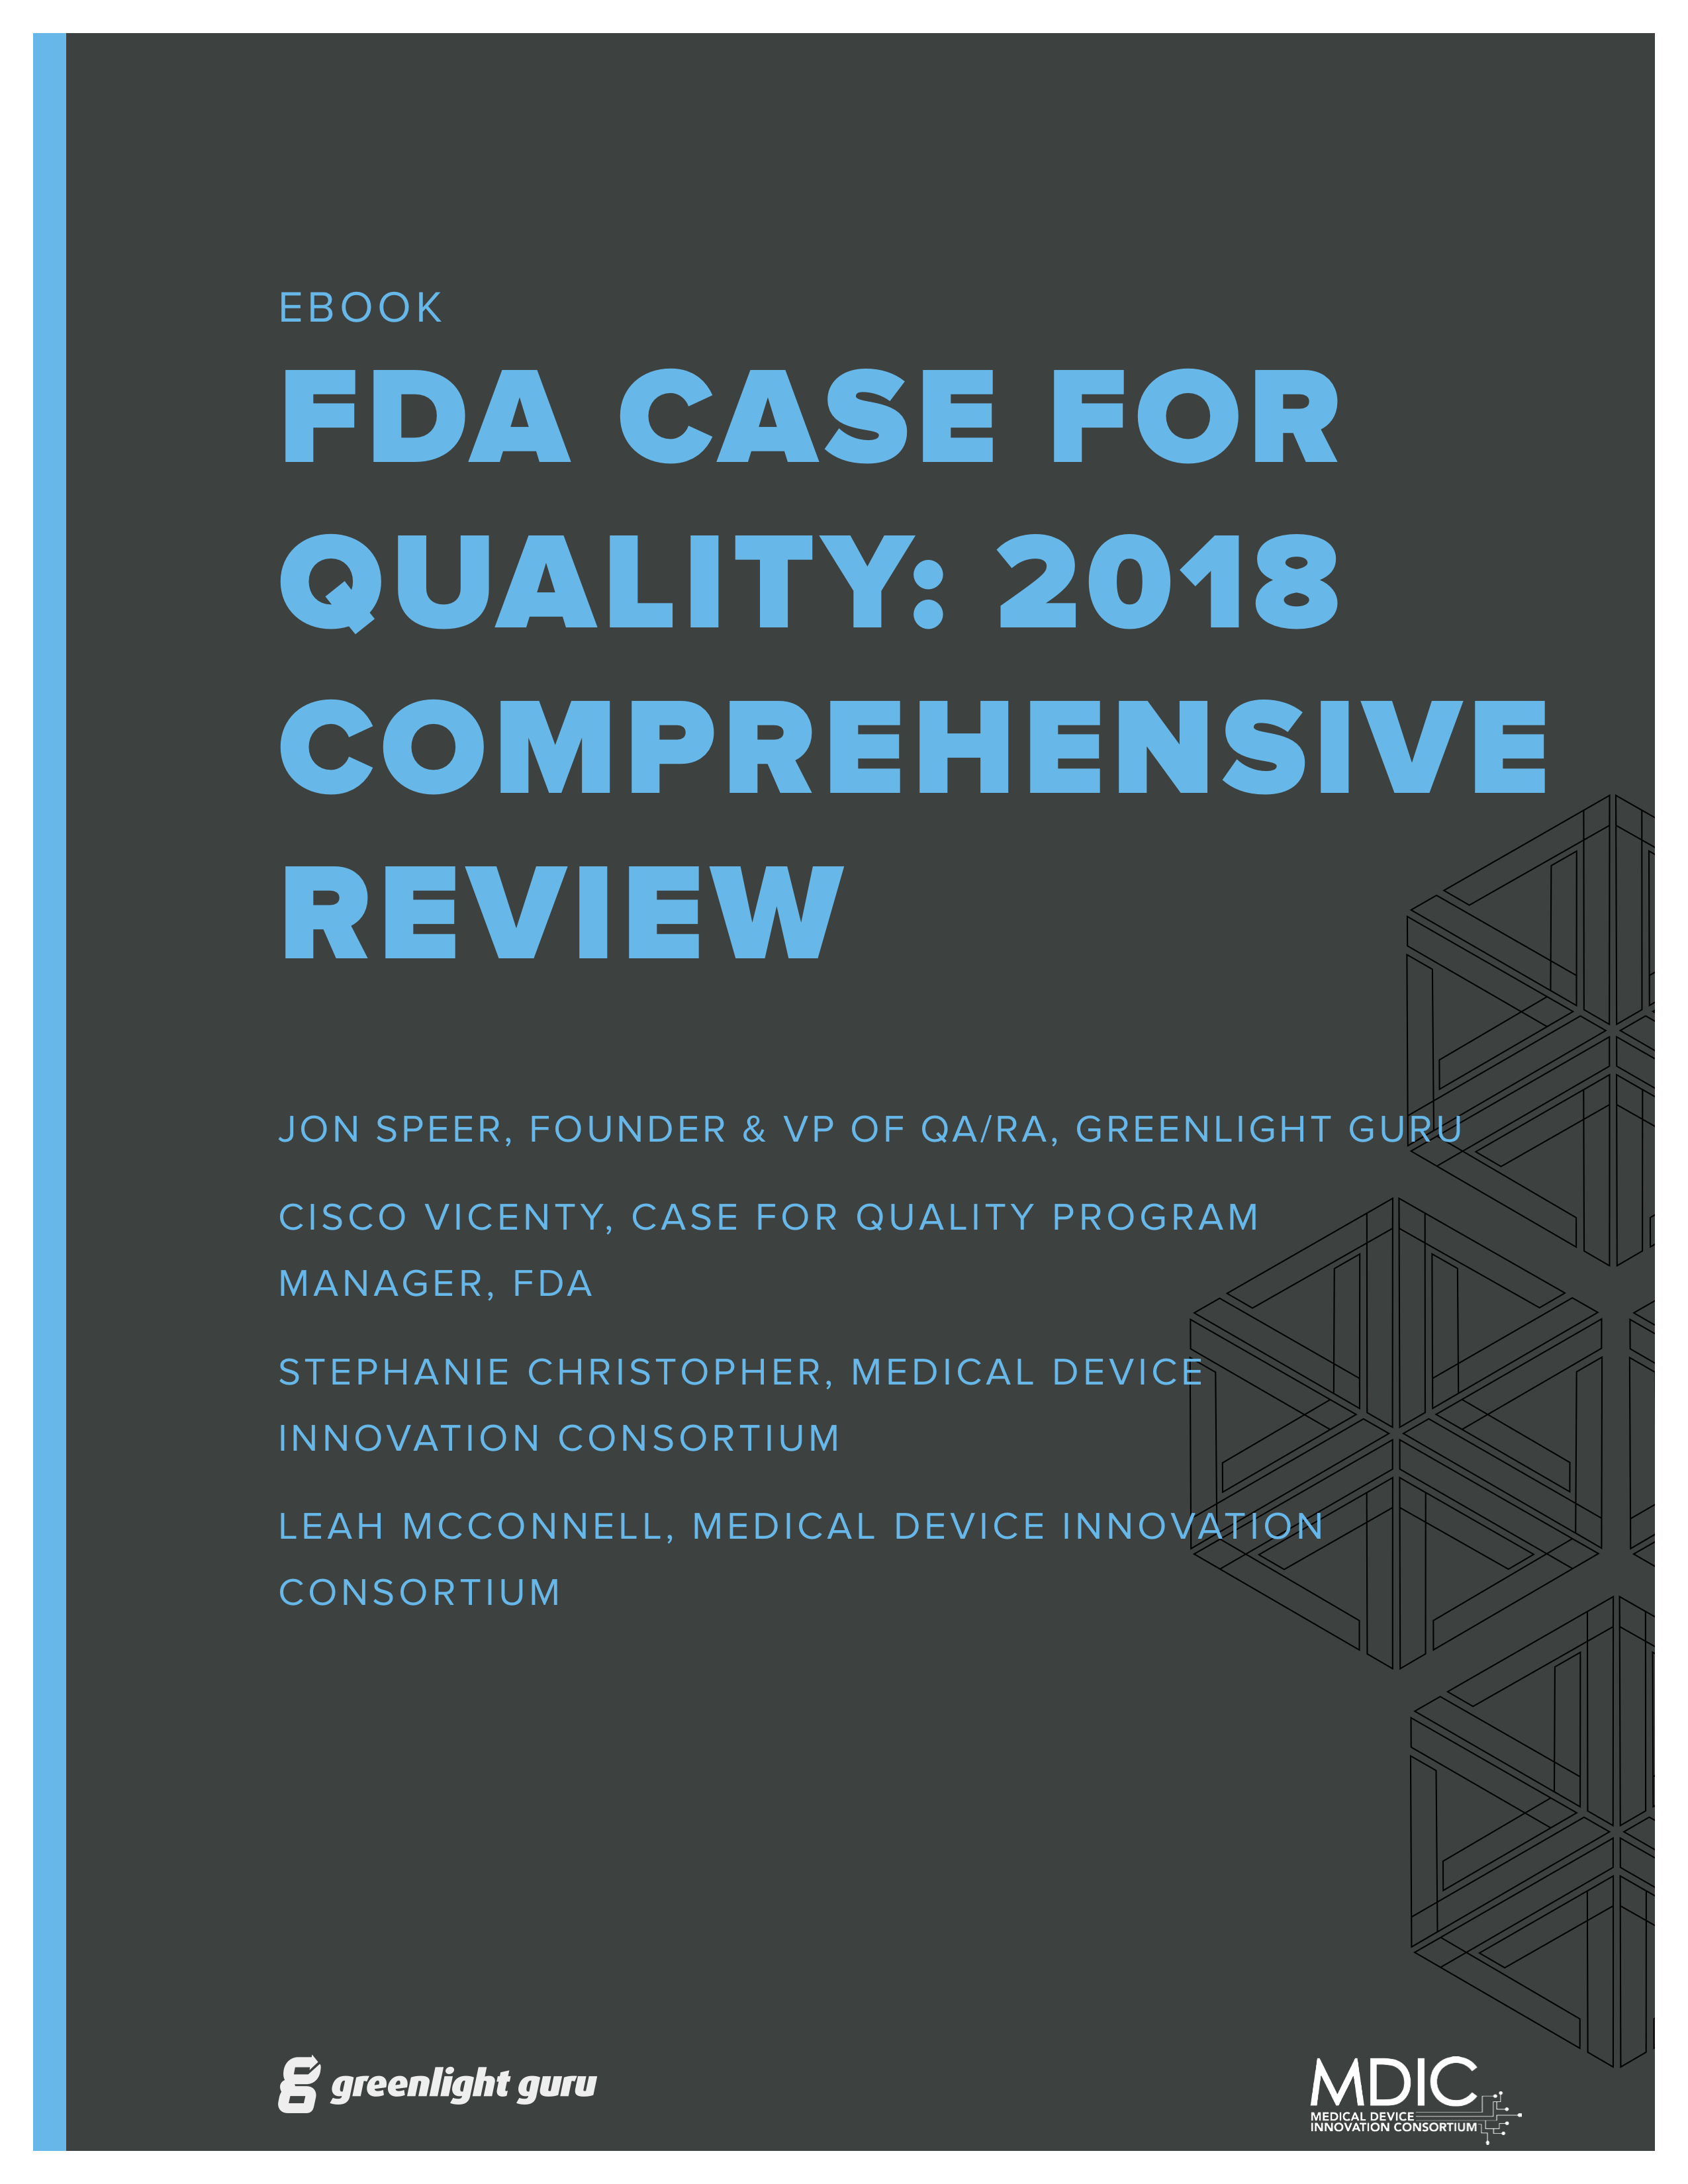 FDA Case for Quality 2018 comprehensive review free ebook download